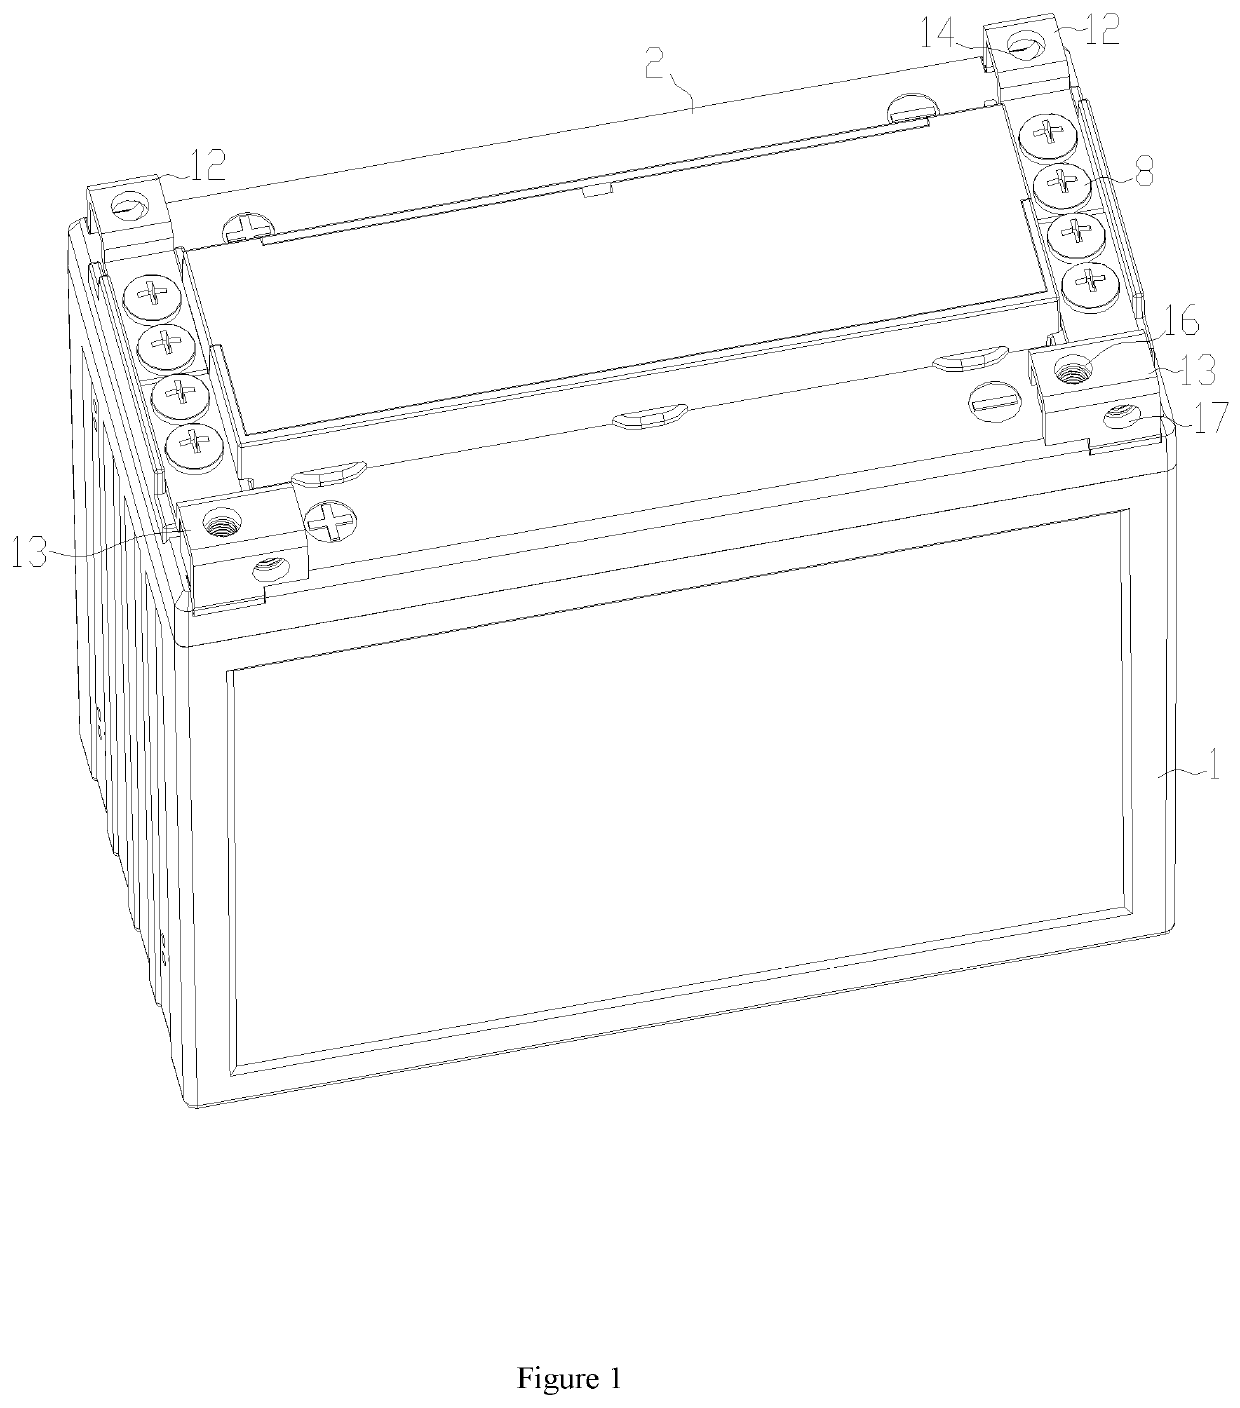 Battery covering structure with replaceable terminals